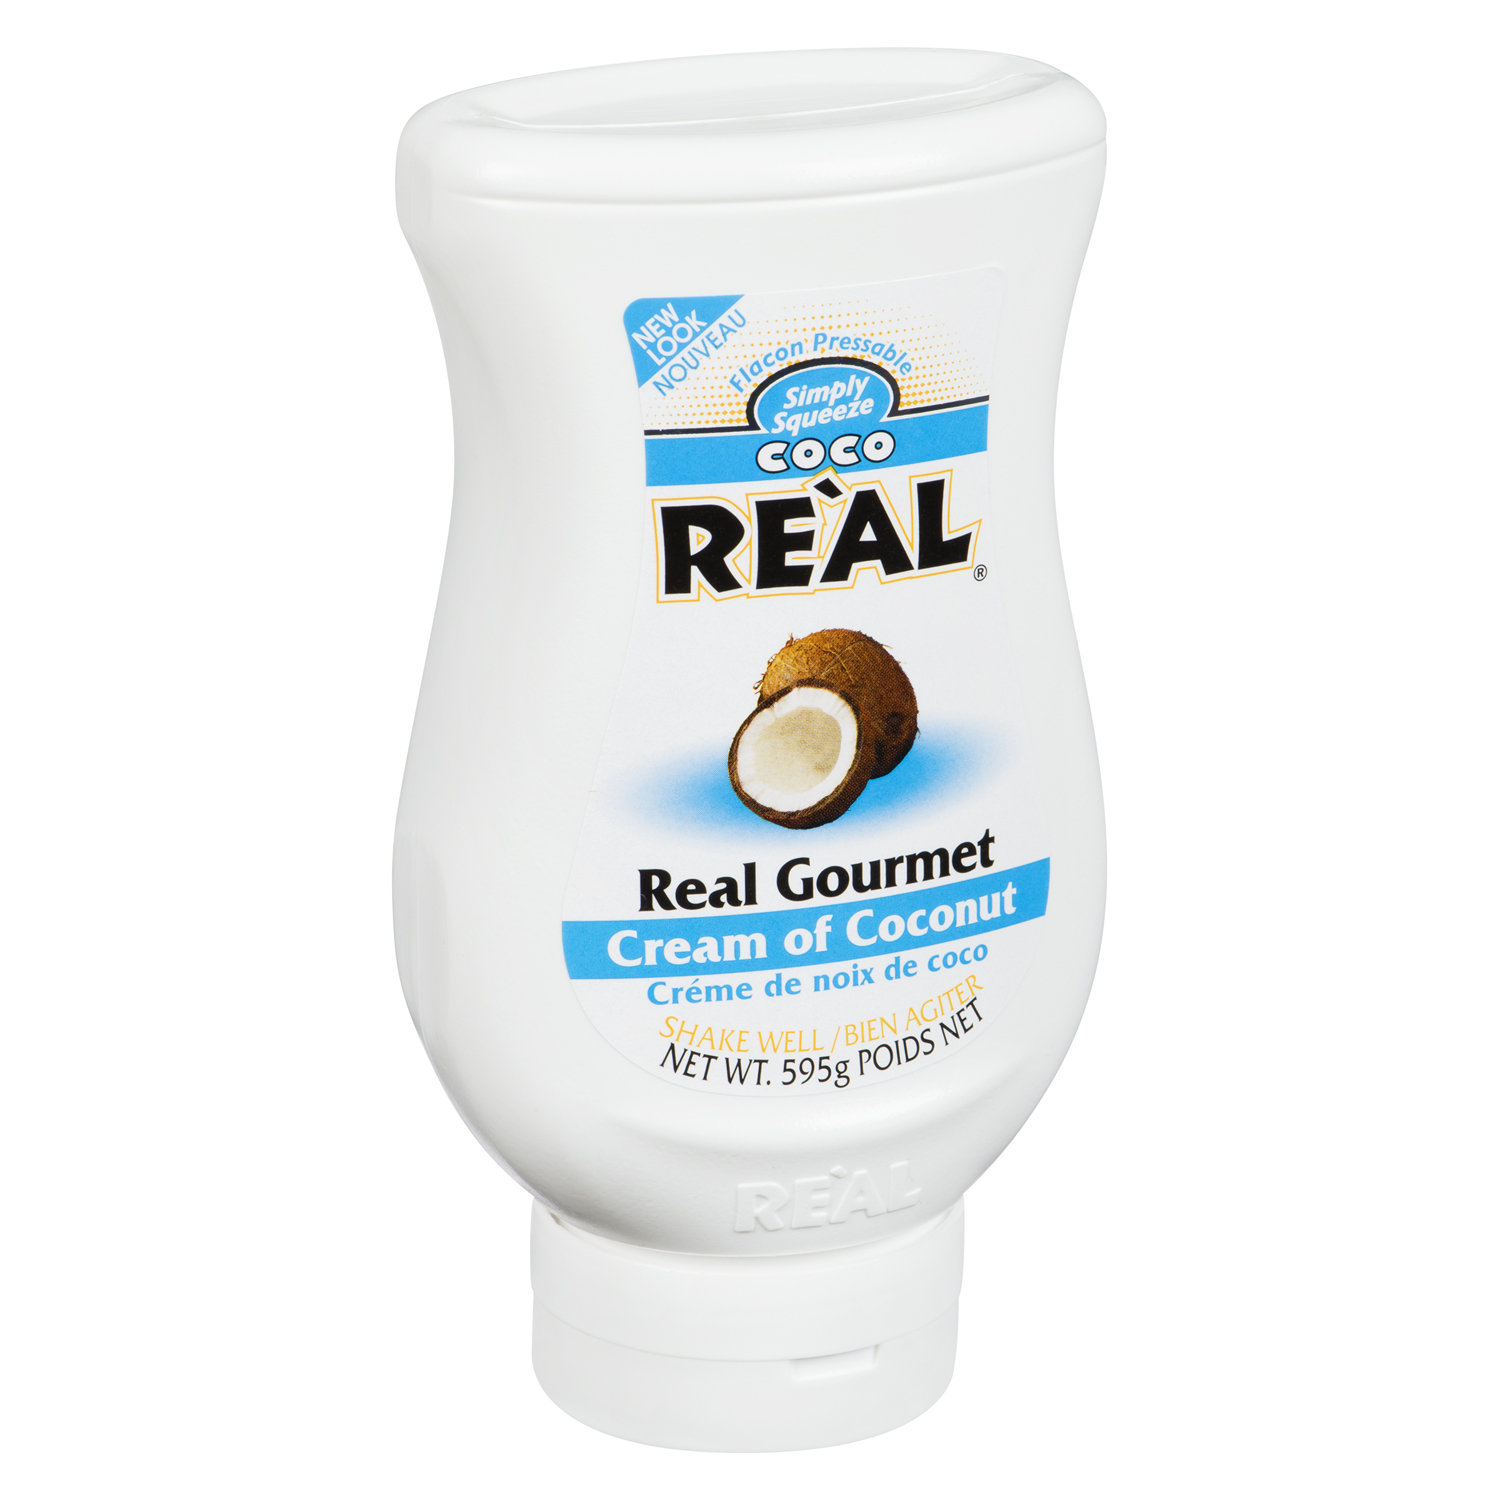 Coco Real - Cream of Coconut - Save-On-Foods